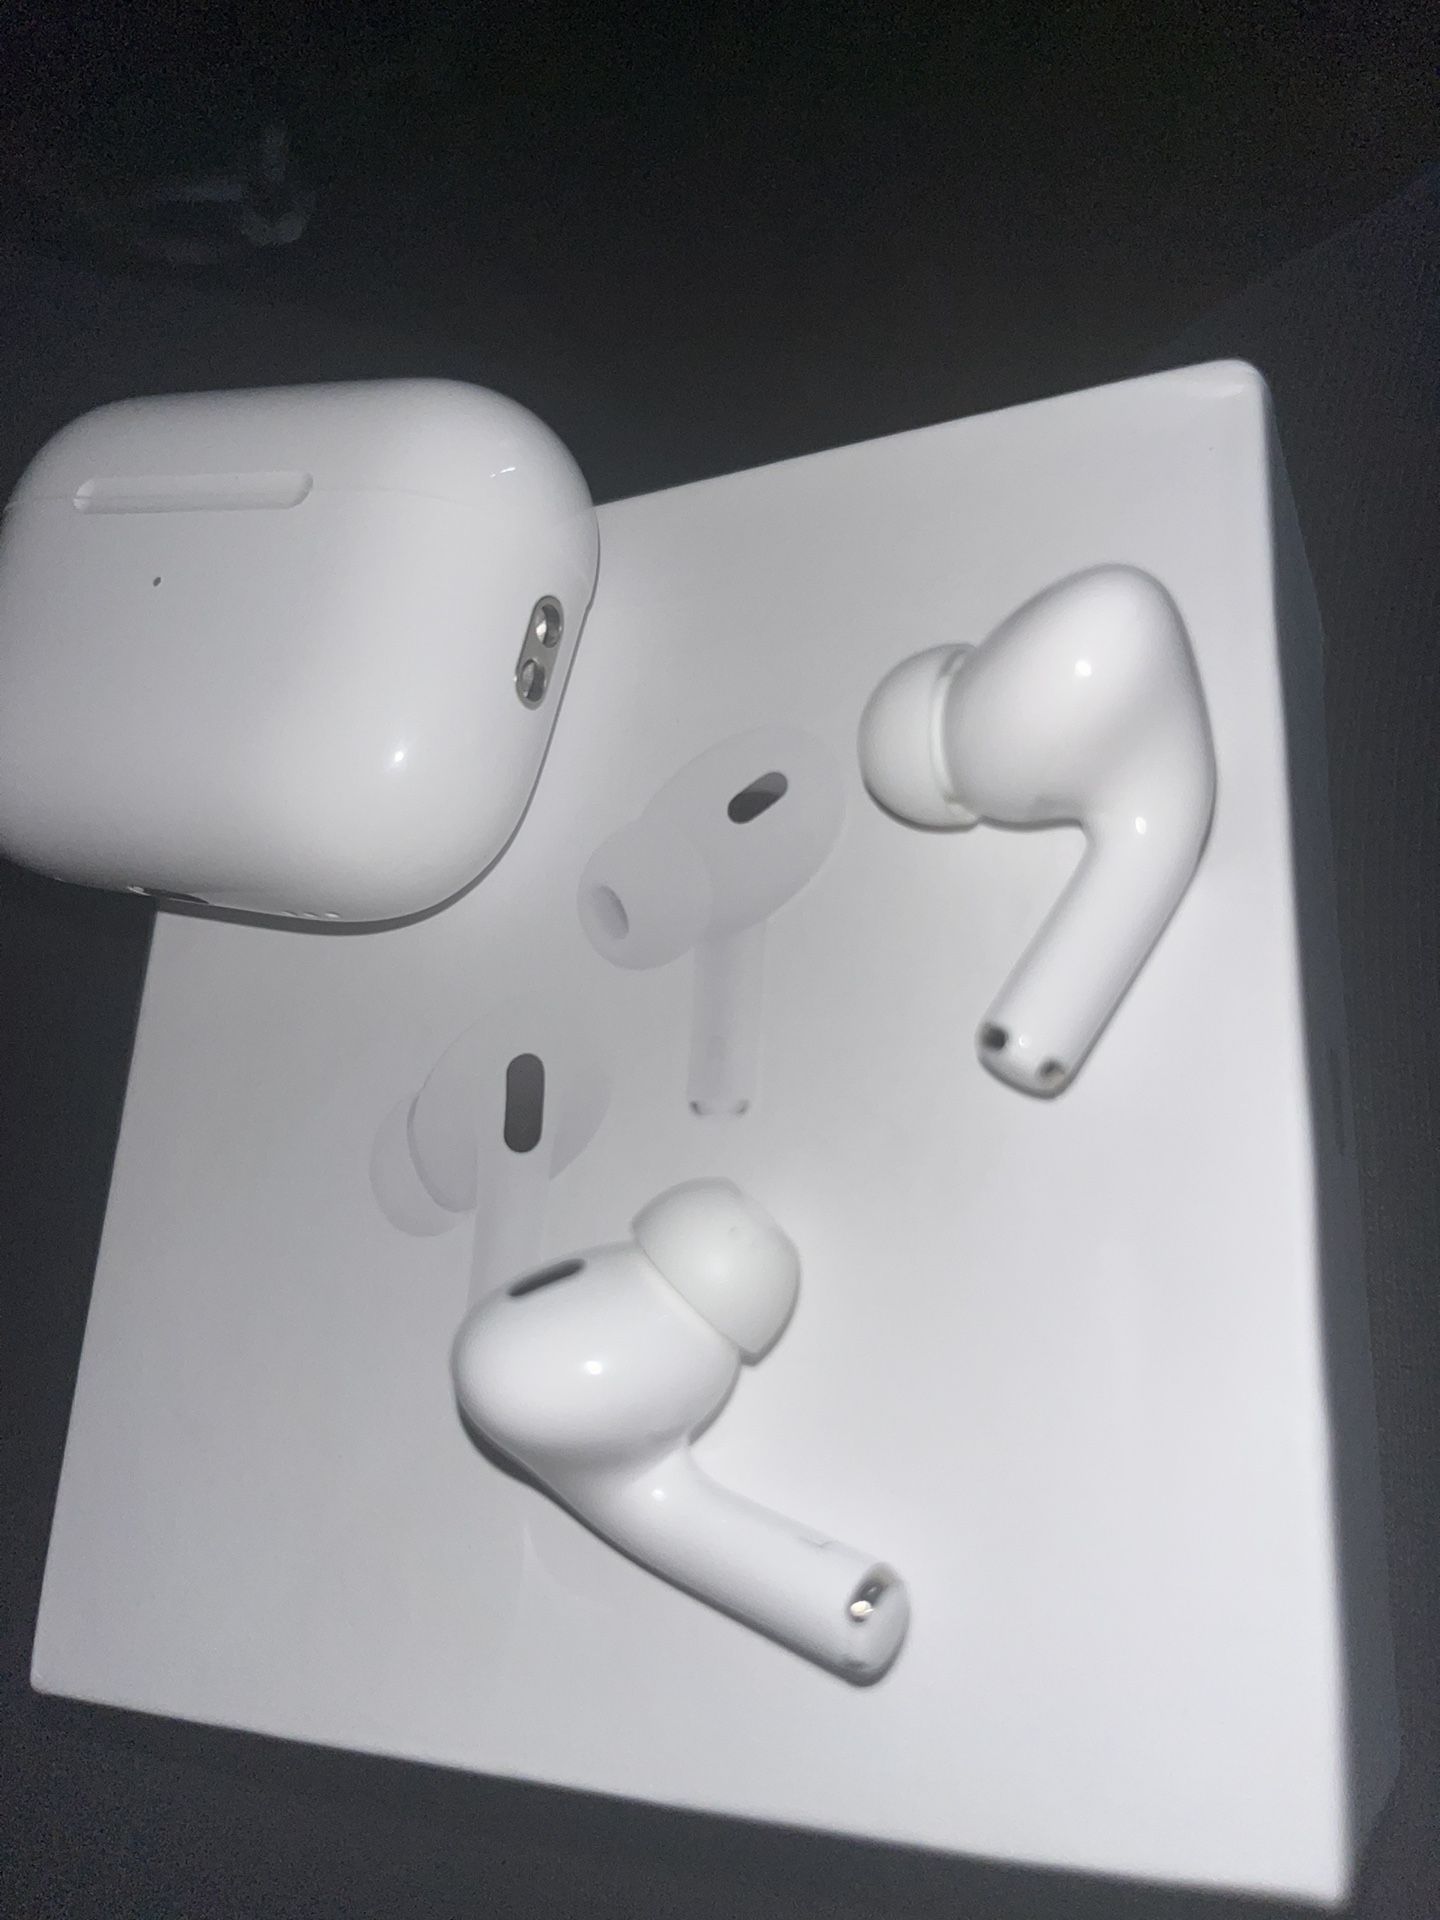 Apple AirPods Pro (2nd Generation)with MagSafe Wireless Charging Case - White